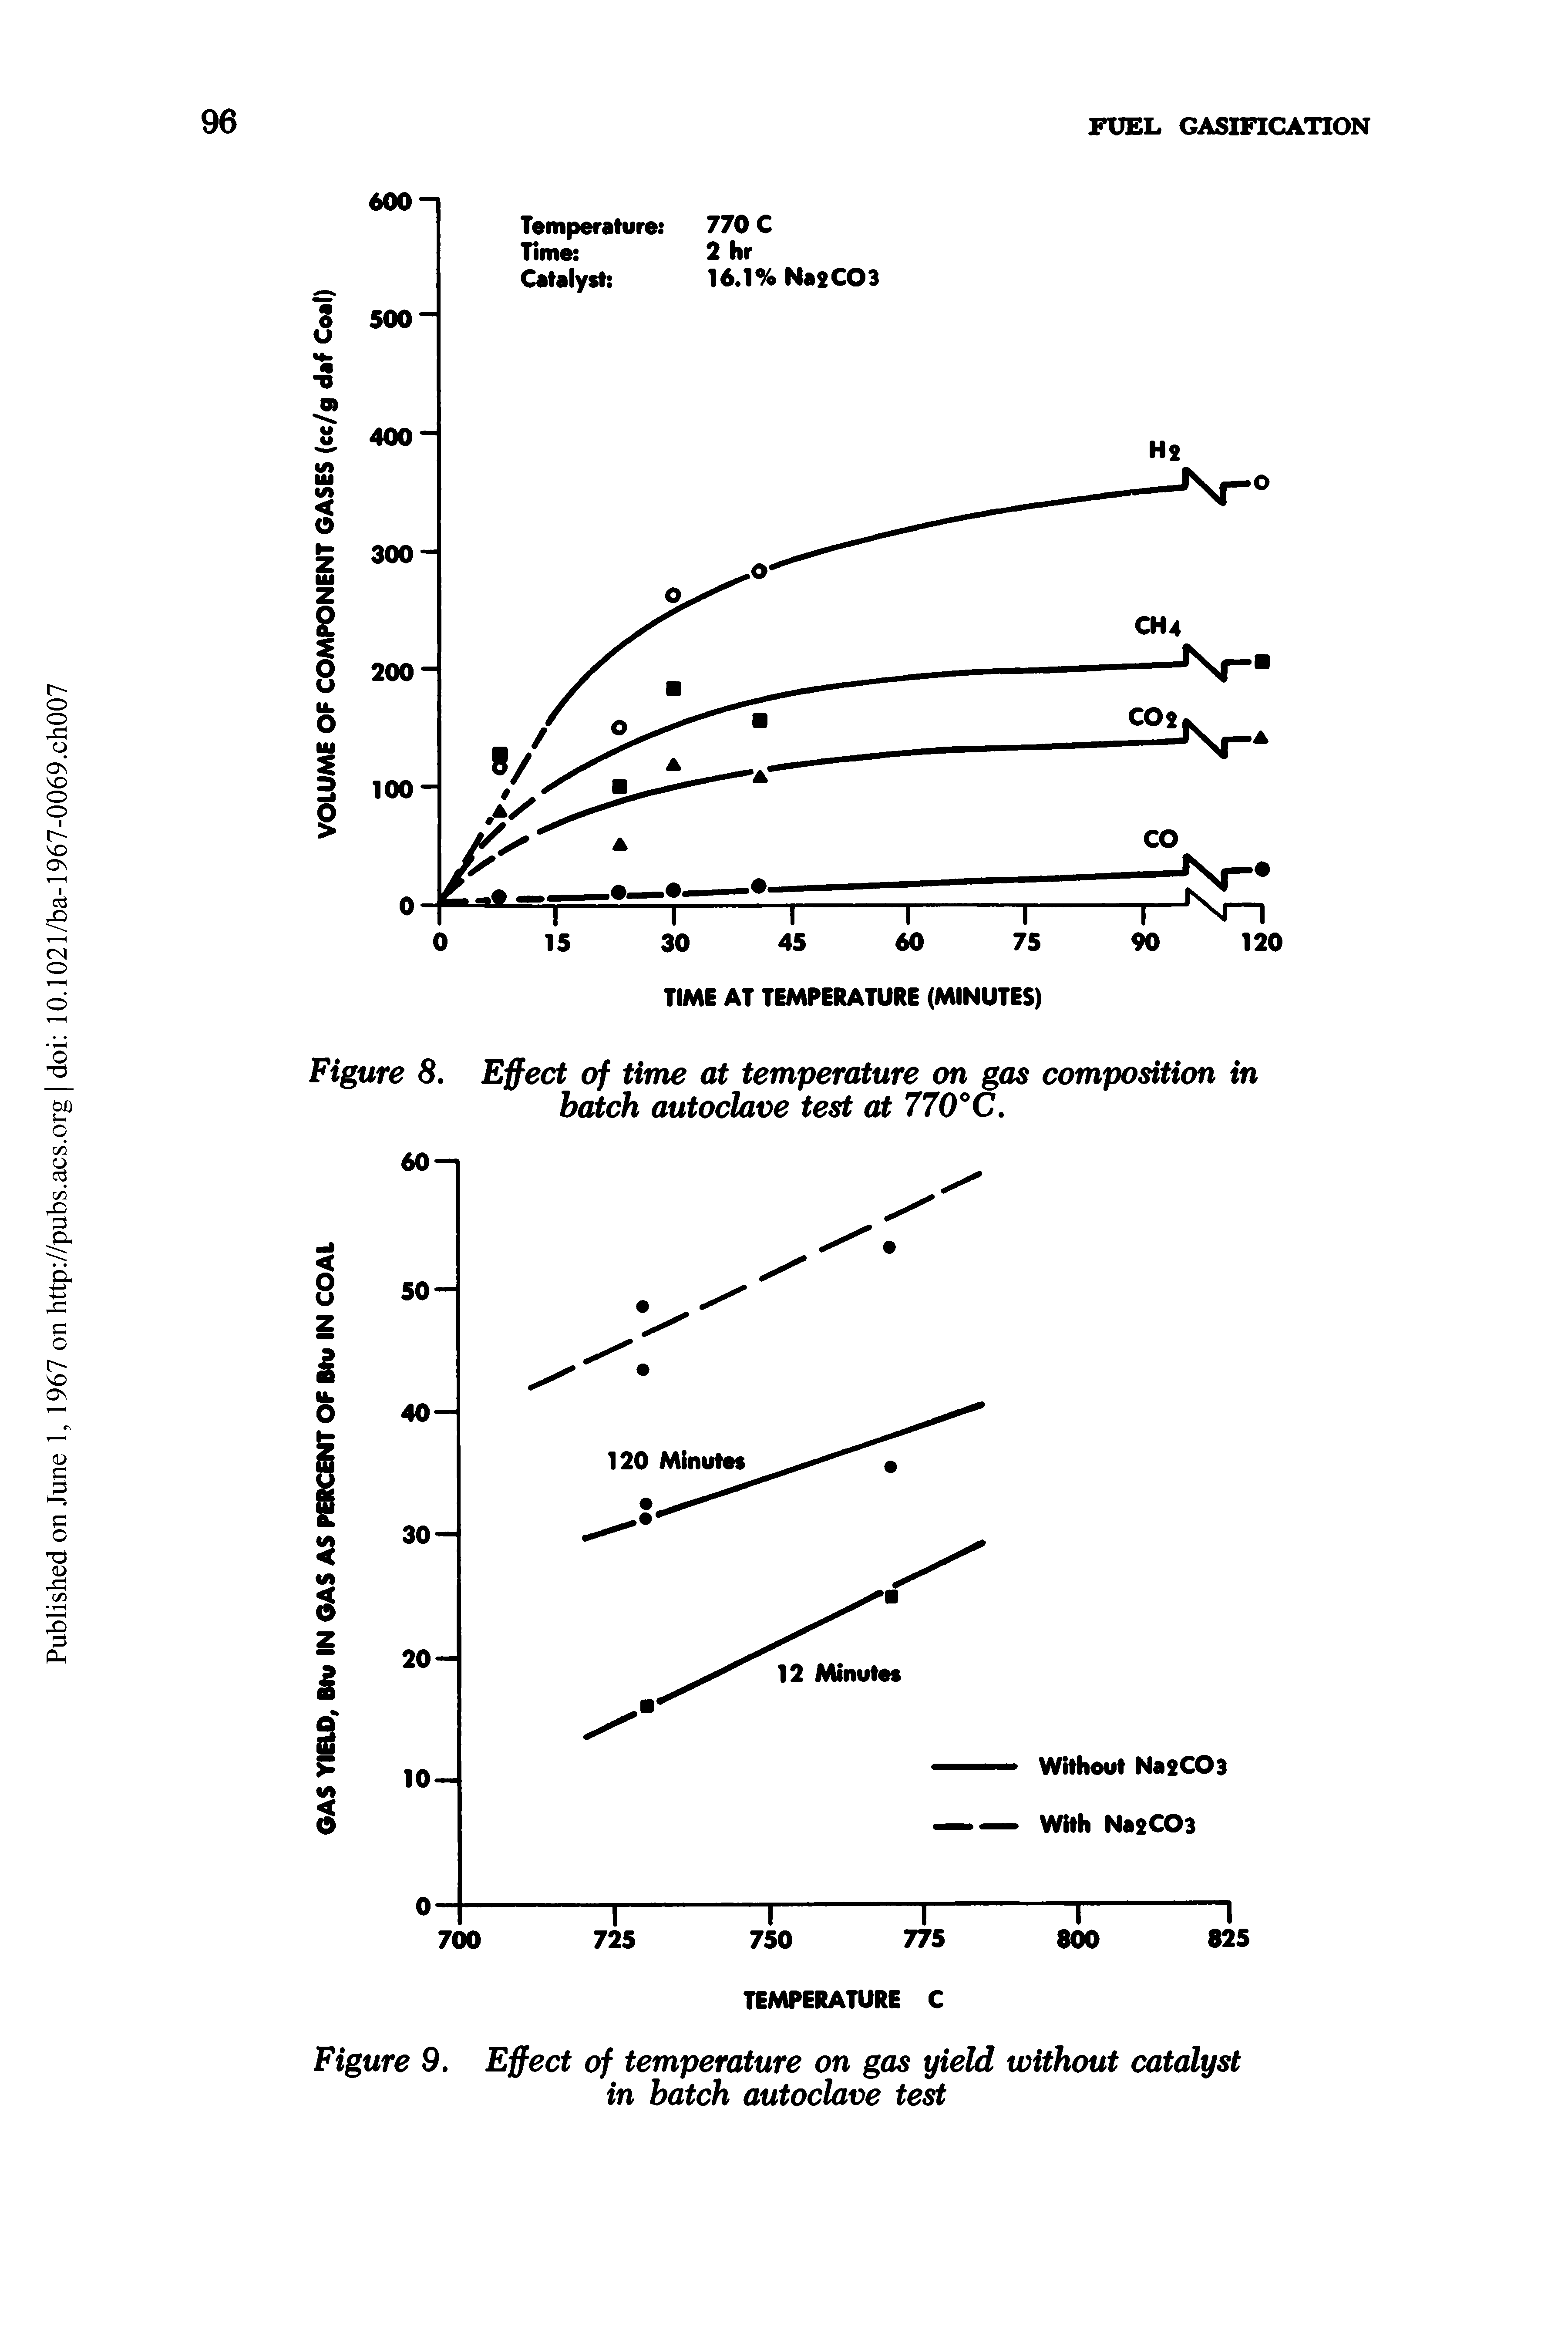 Figure 9. Effect of temperature on gas yield without catalyst in batch autoclave test...